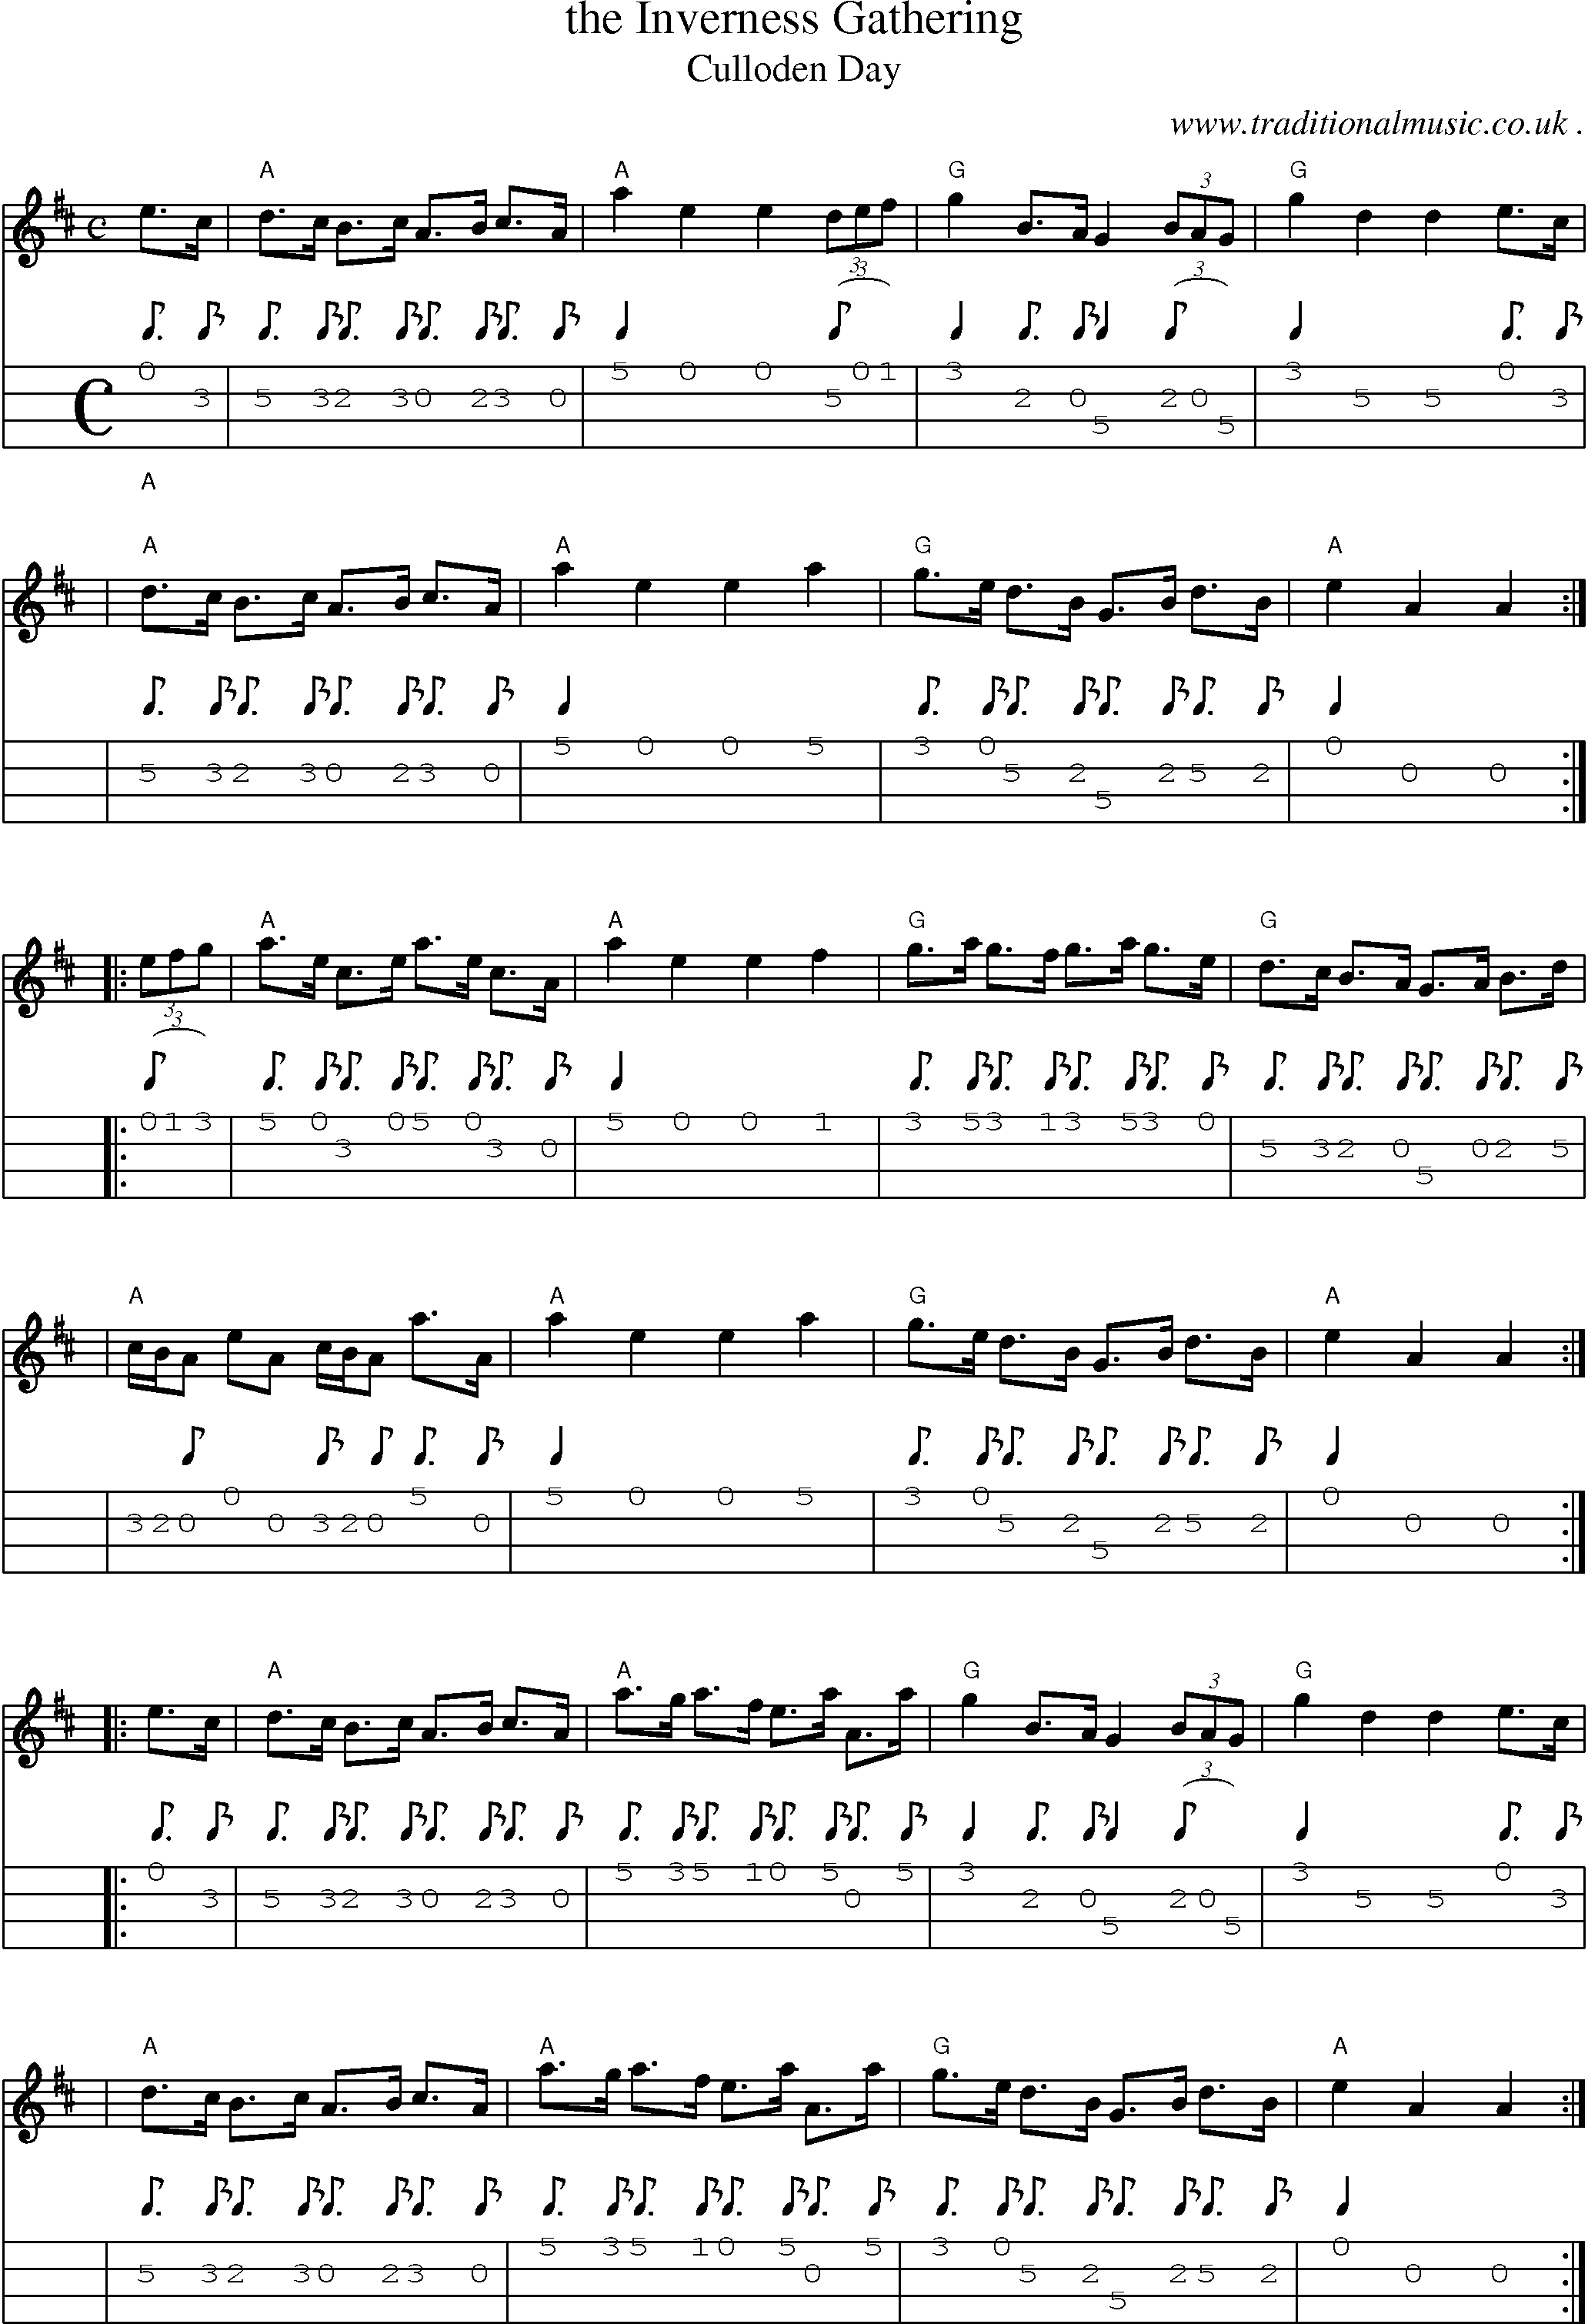 Sheet-music  score, Chords and Mandolin Tabs for The Inverness Gathering